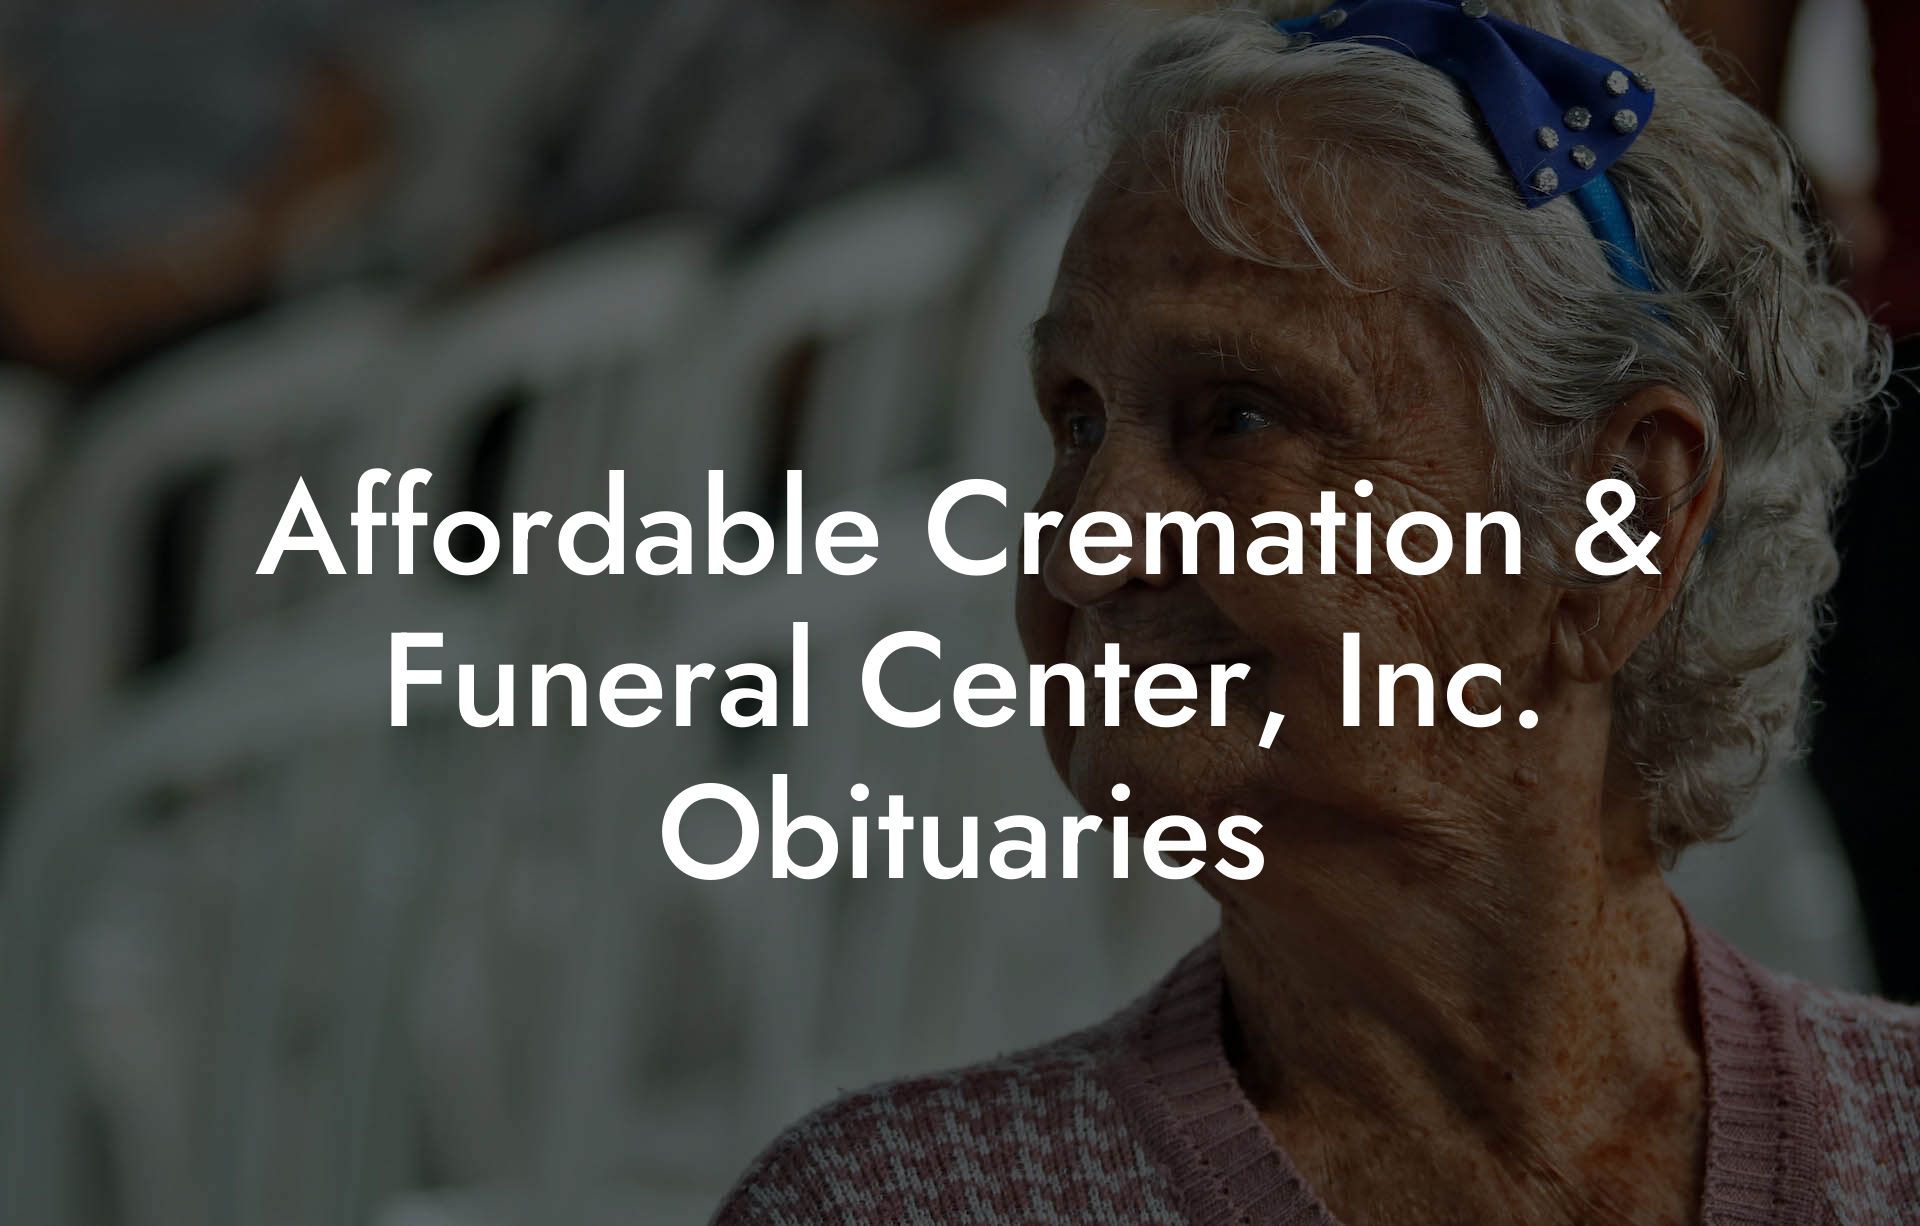 Affordable Cremation & Funeral Center, Inc. Obituaries